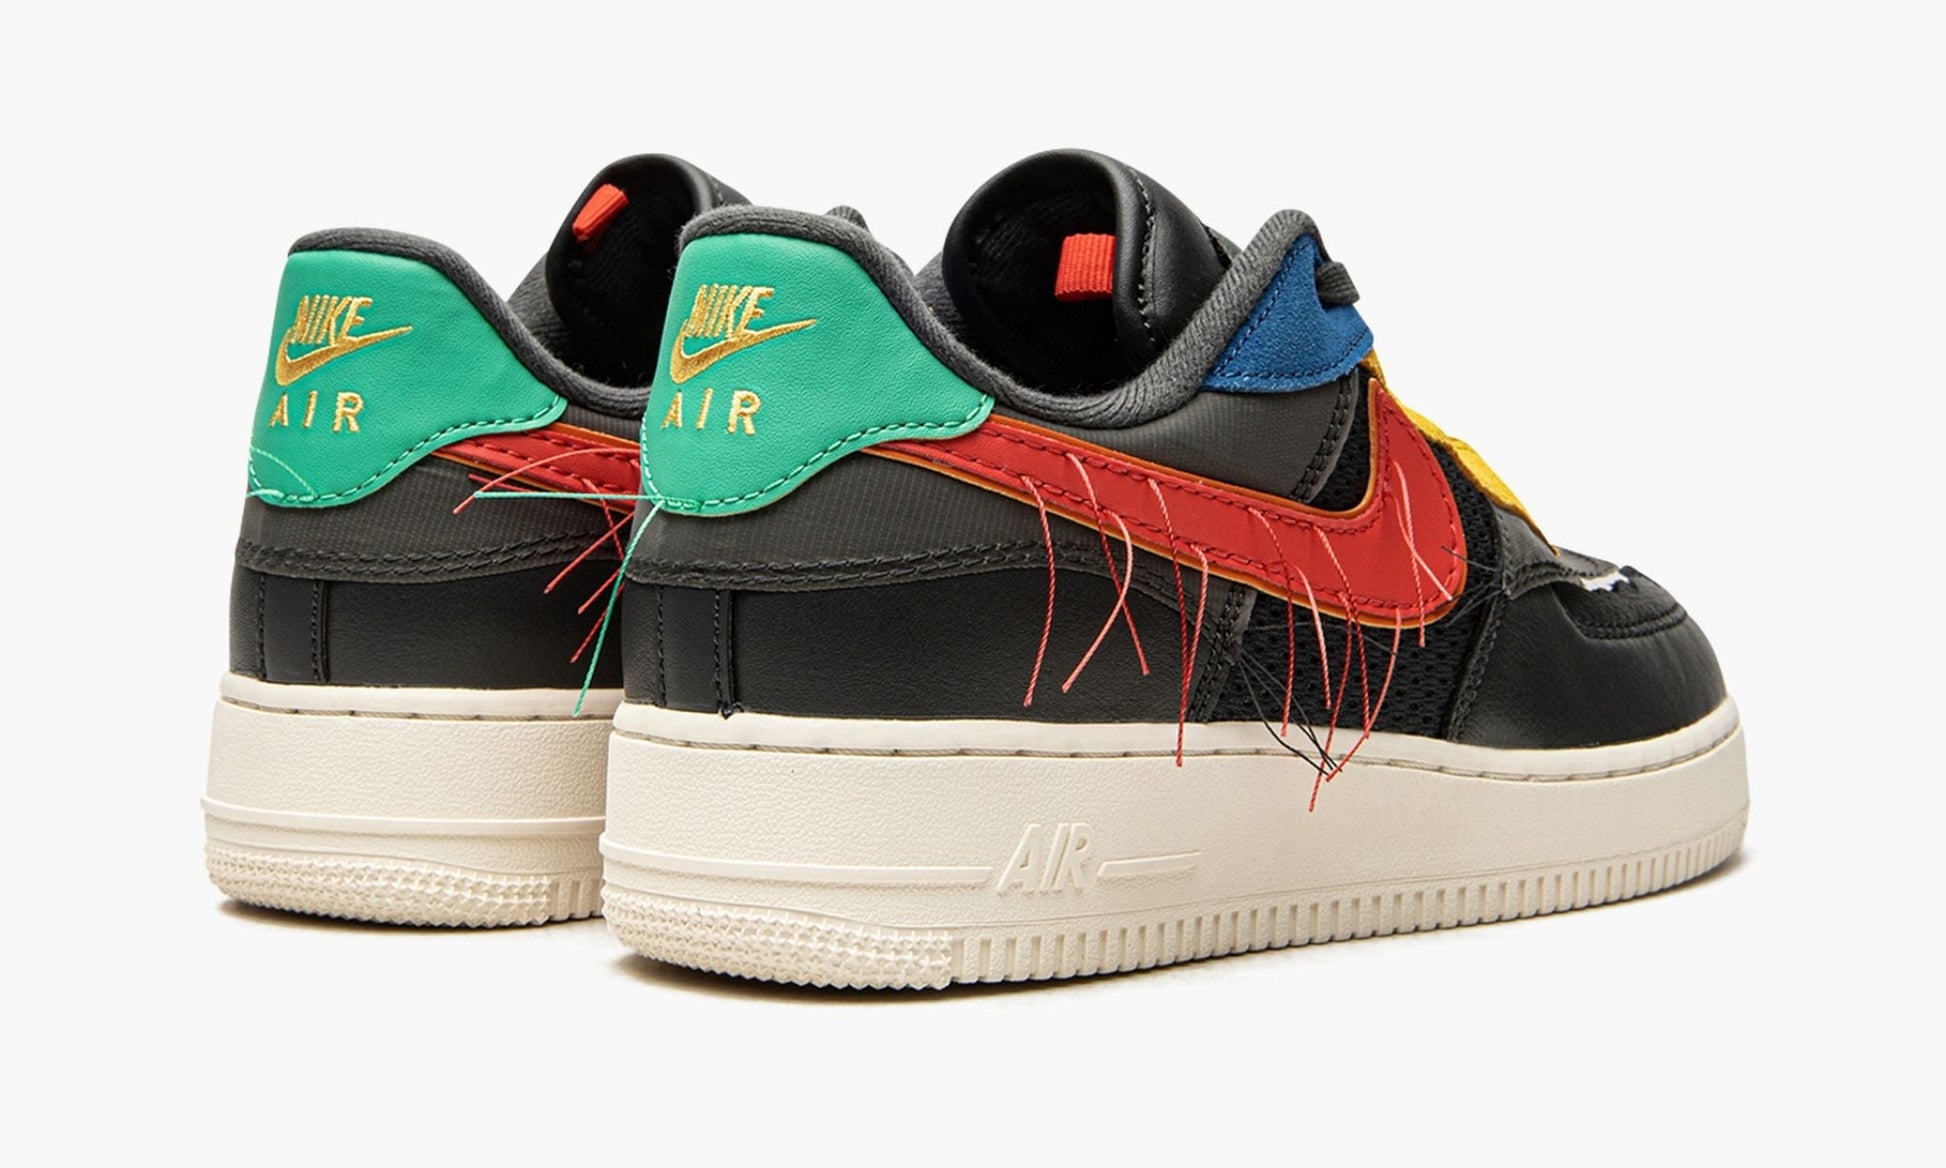 Air Force 1 Low "BHM/Black History Month 2020"